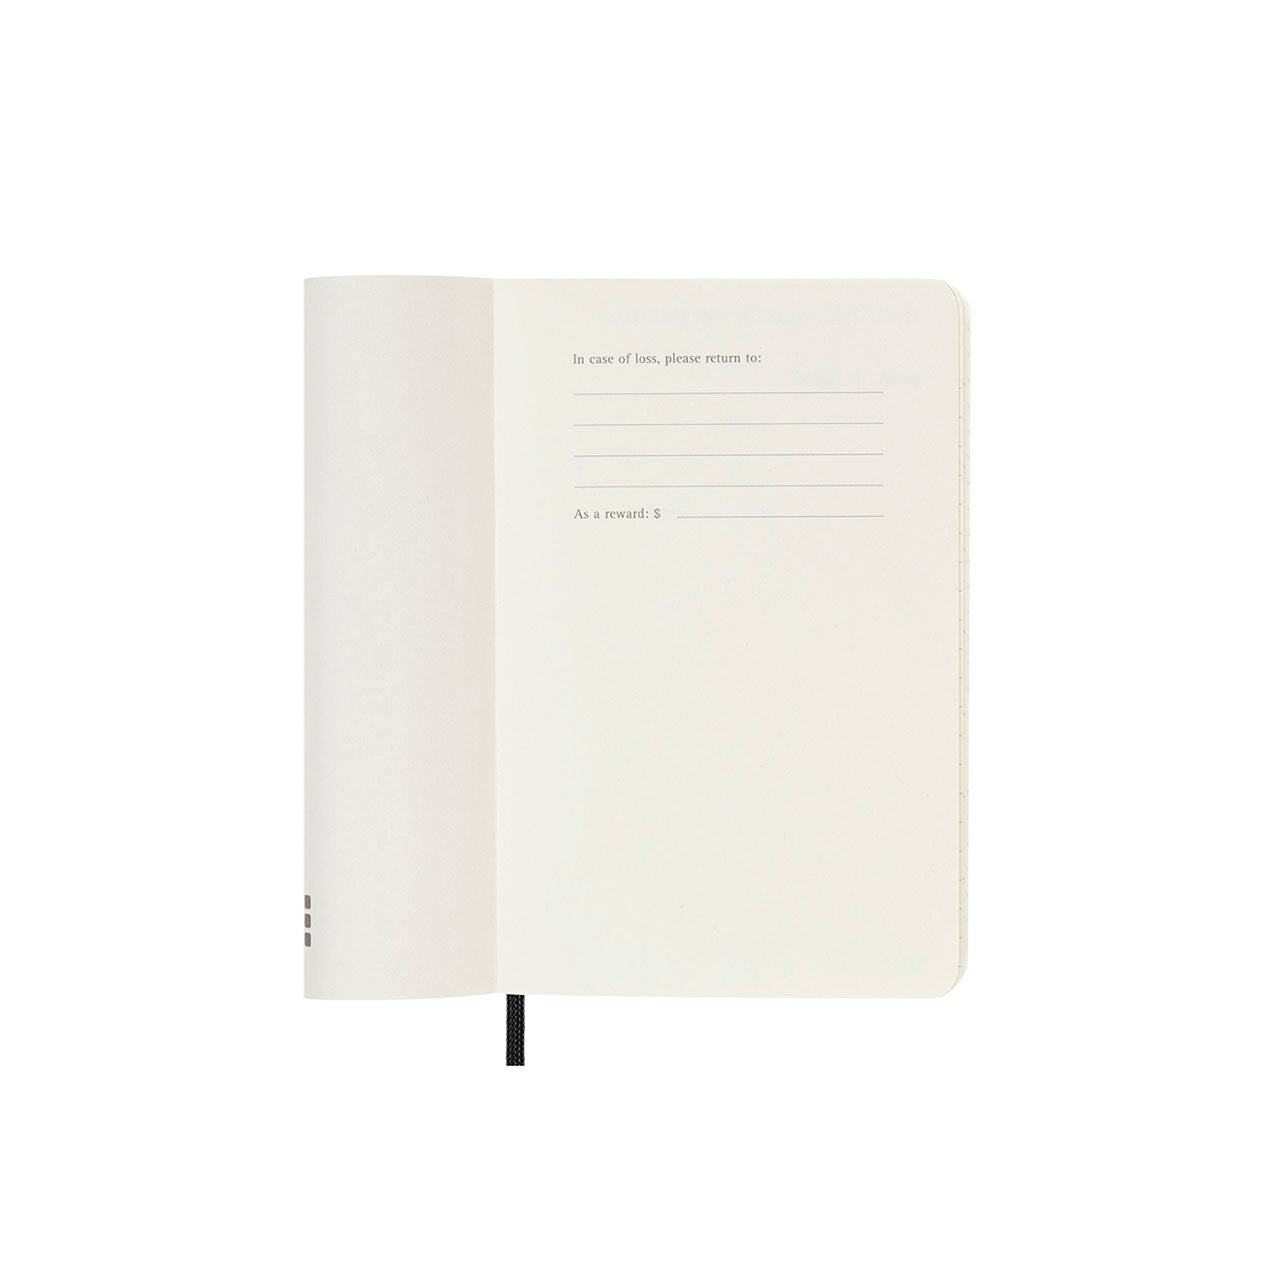 2024 Soft Cover Monthly Diary Pocket